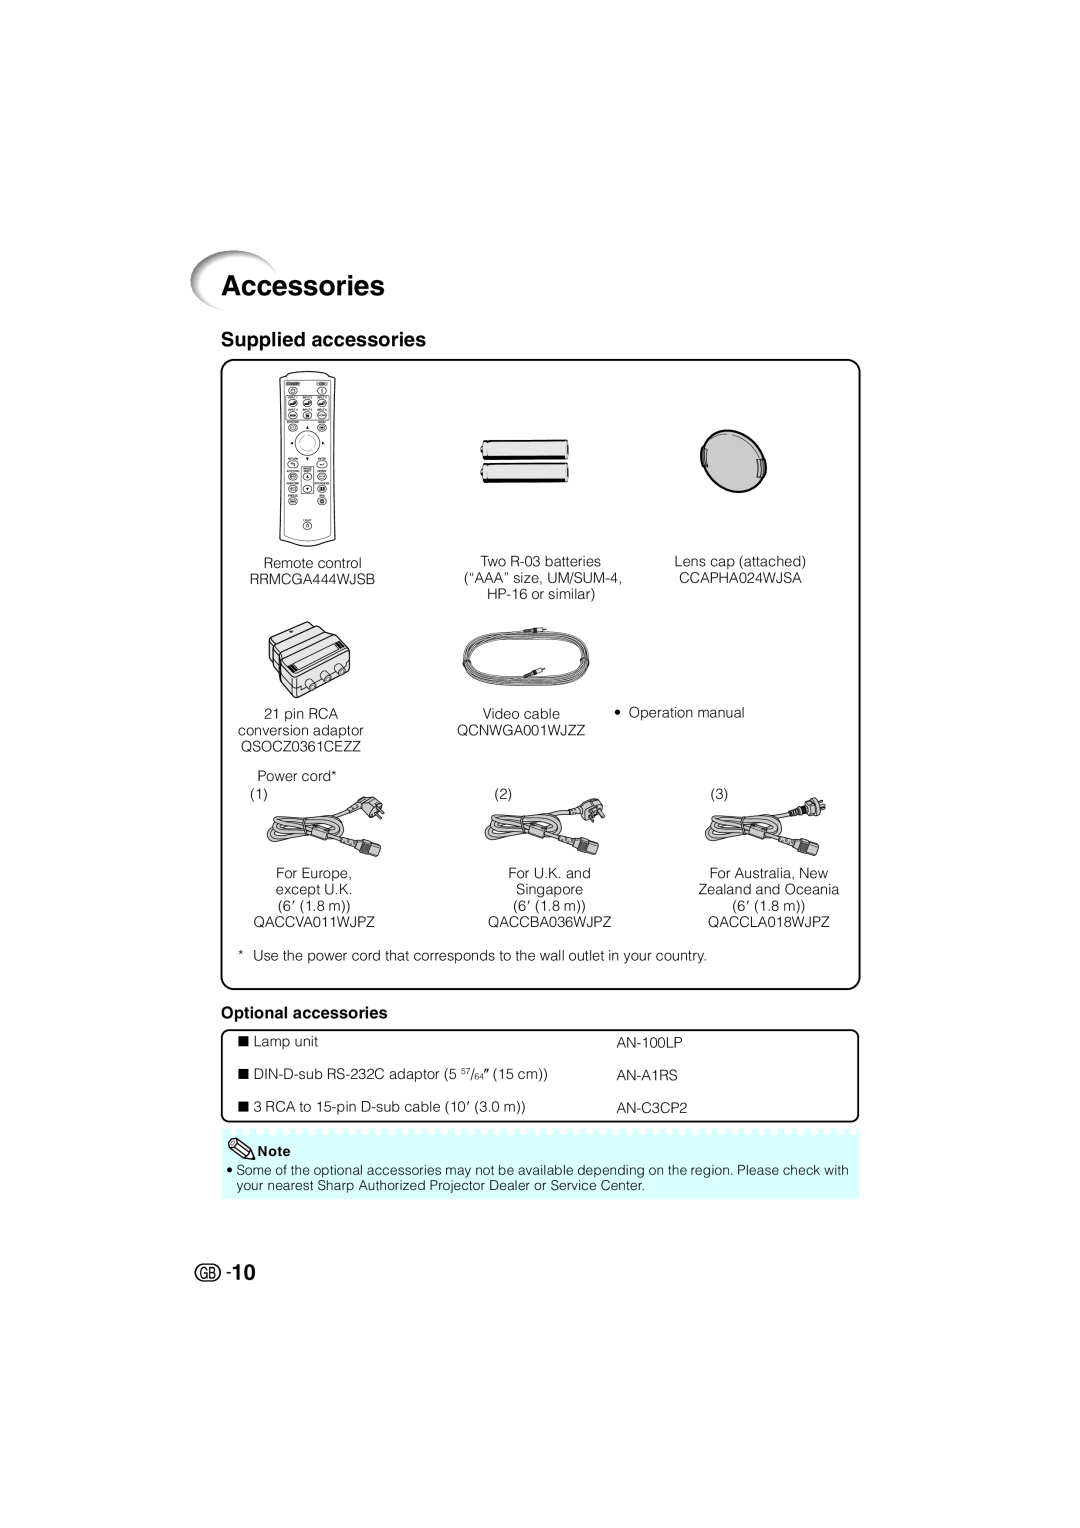 Sharp XV-Z3000 manual Accessories, Supplied accessories, Optional accessories 